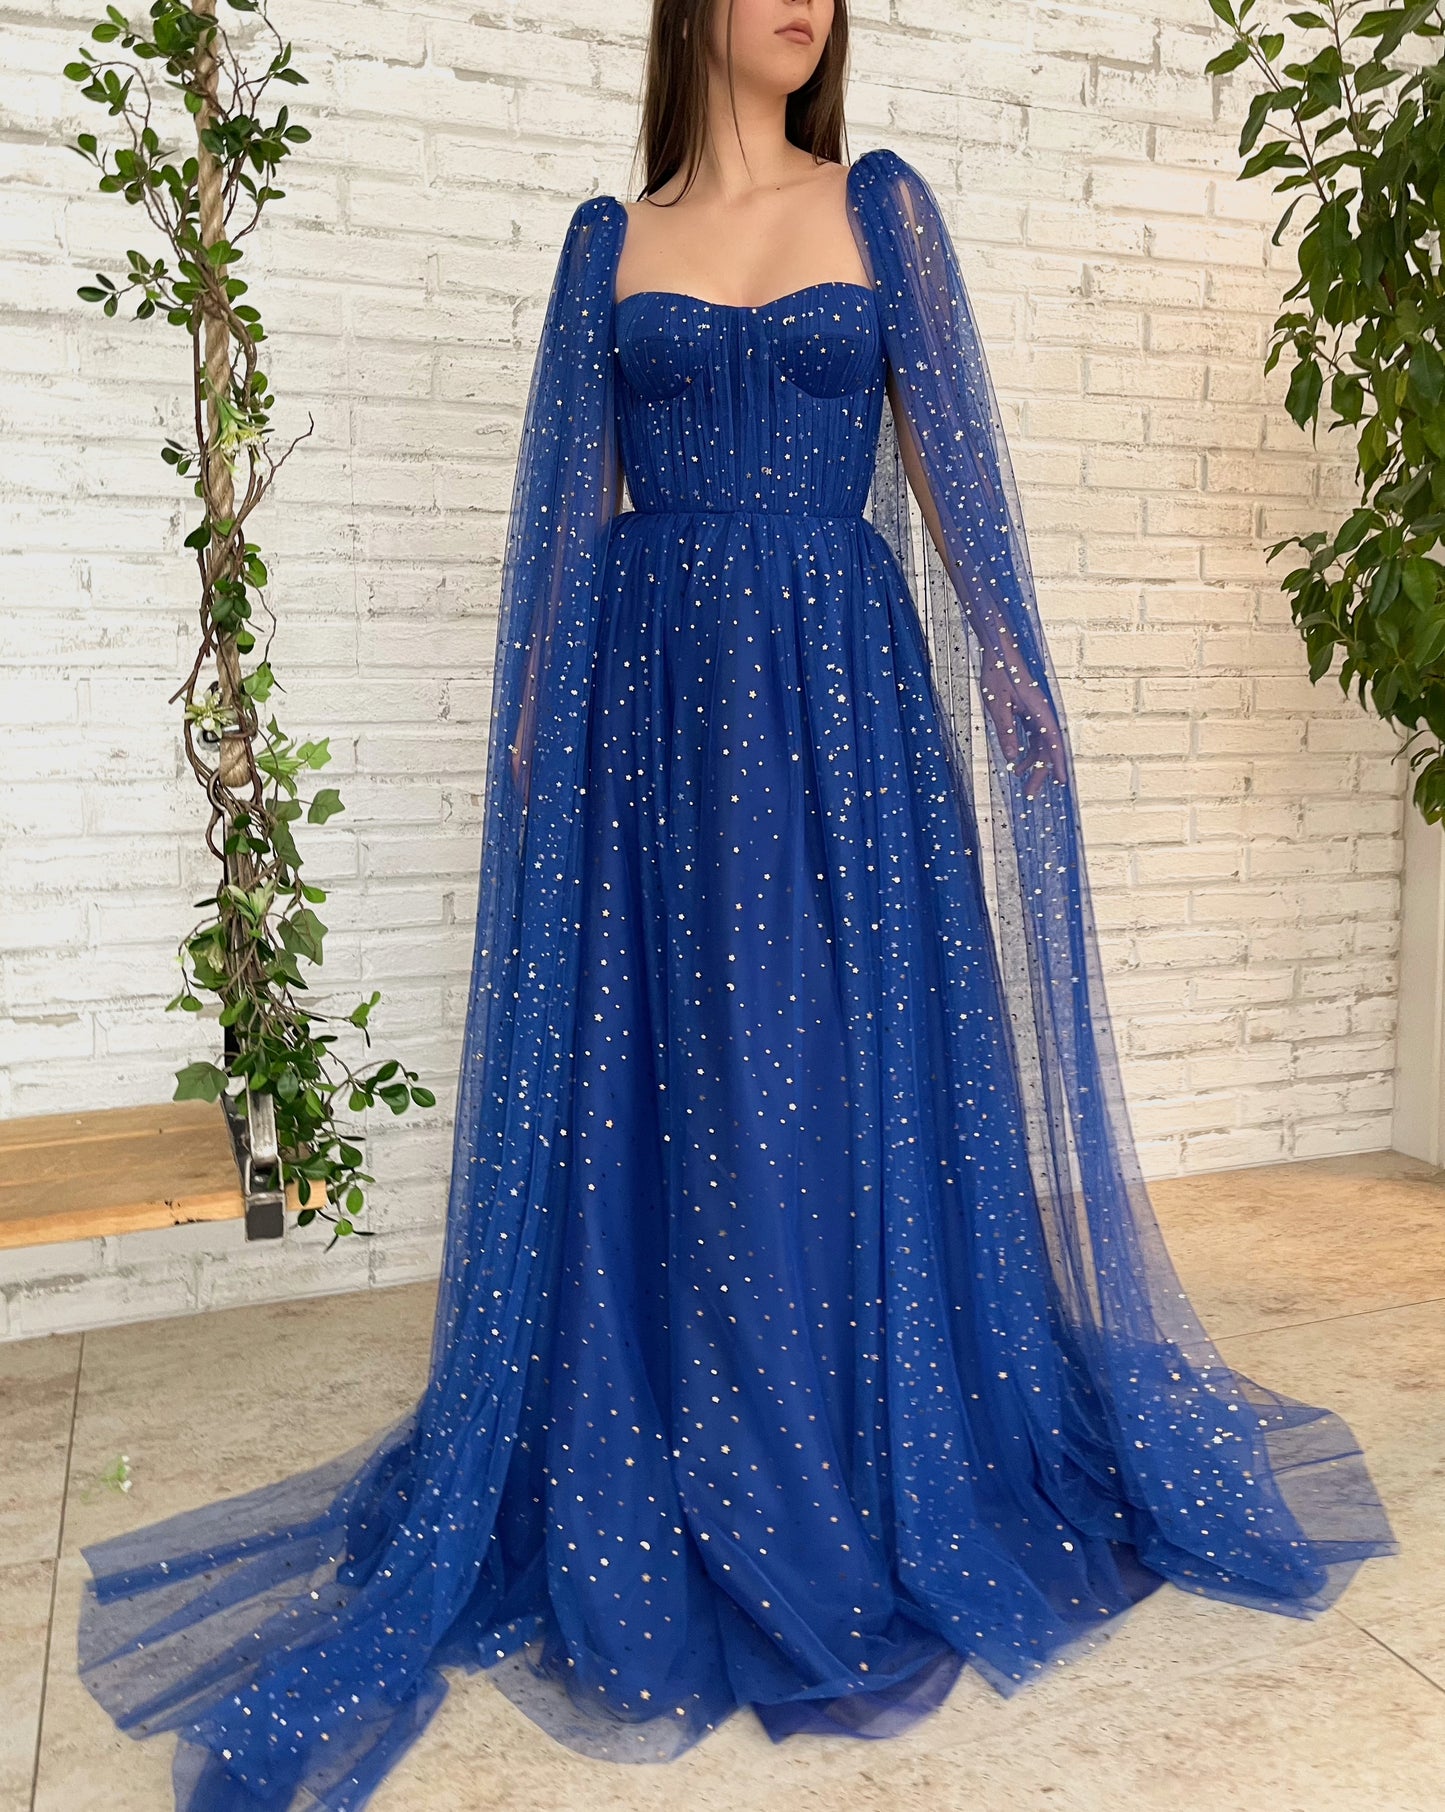 Wish Upon a Star Gown - Teuta MatoshiBlue A-Line dress with cape sleeves, spaghetti straps and starry fabric